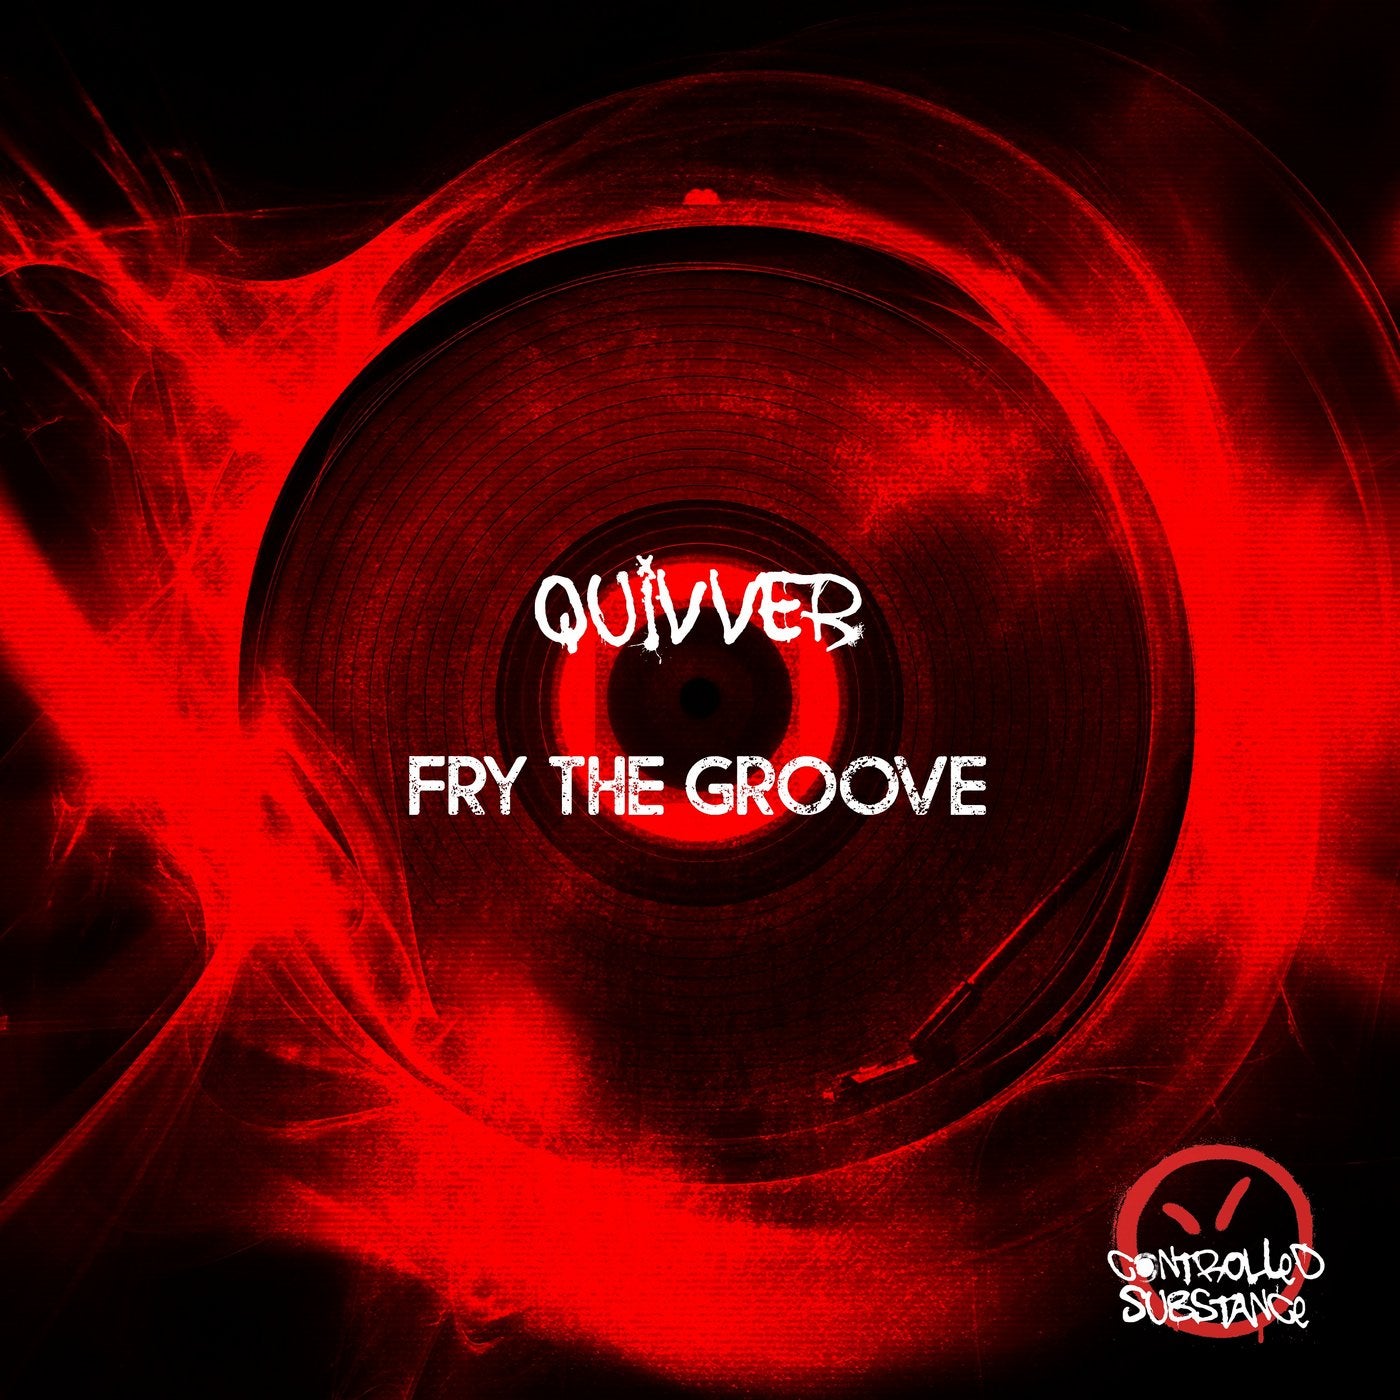 Fry the Groove